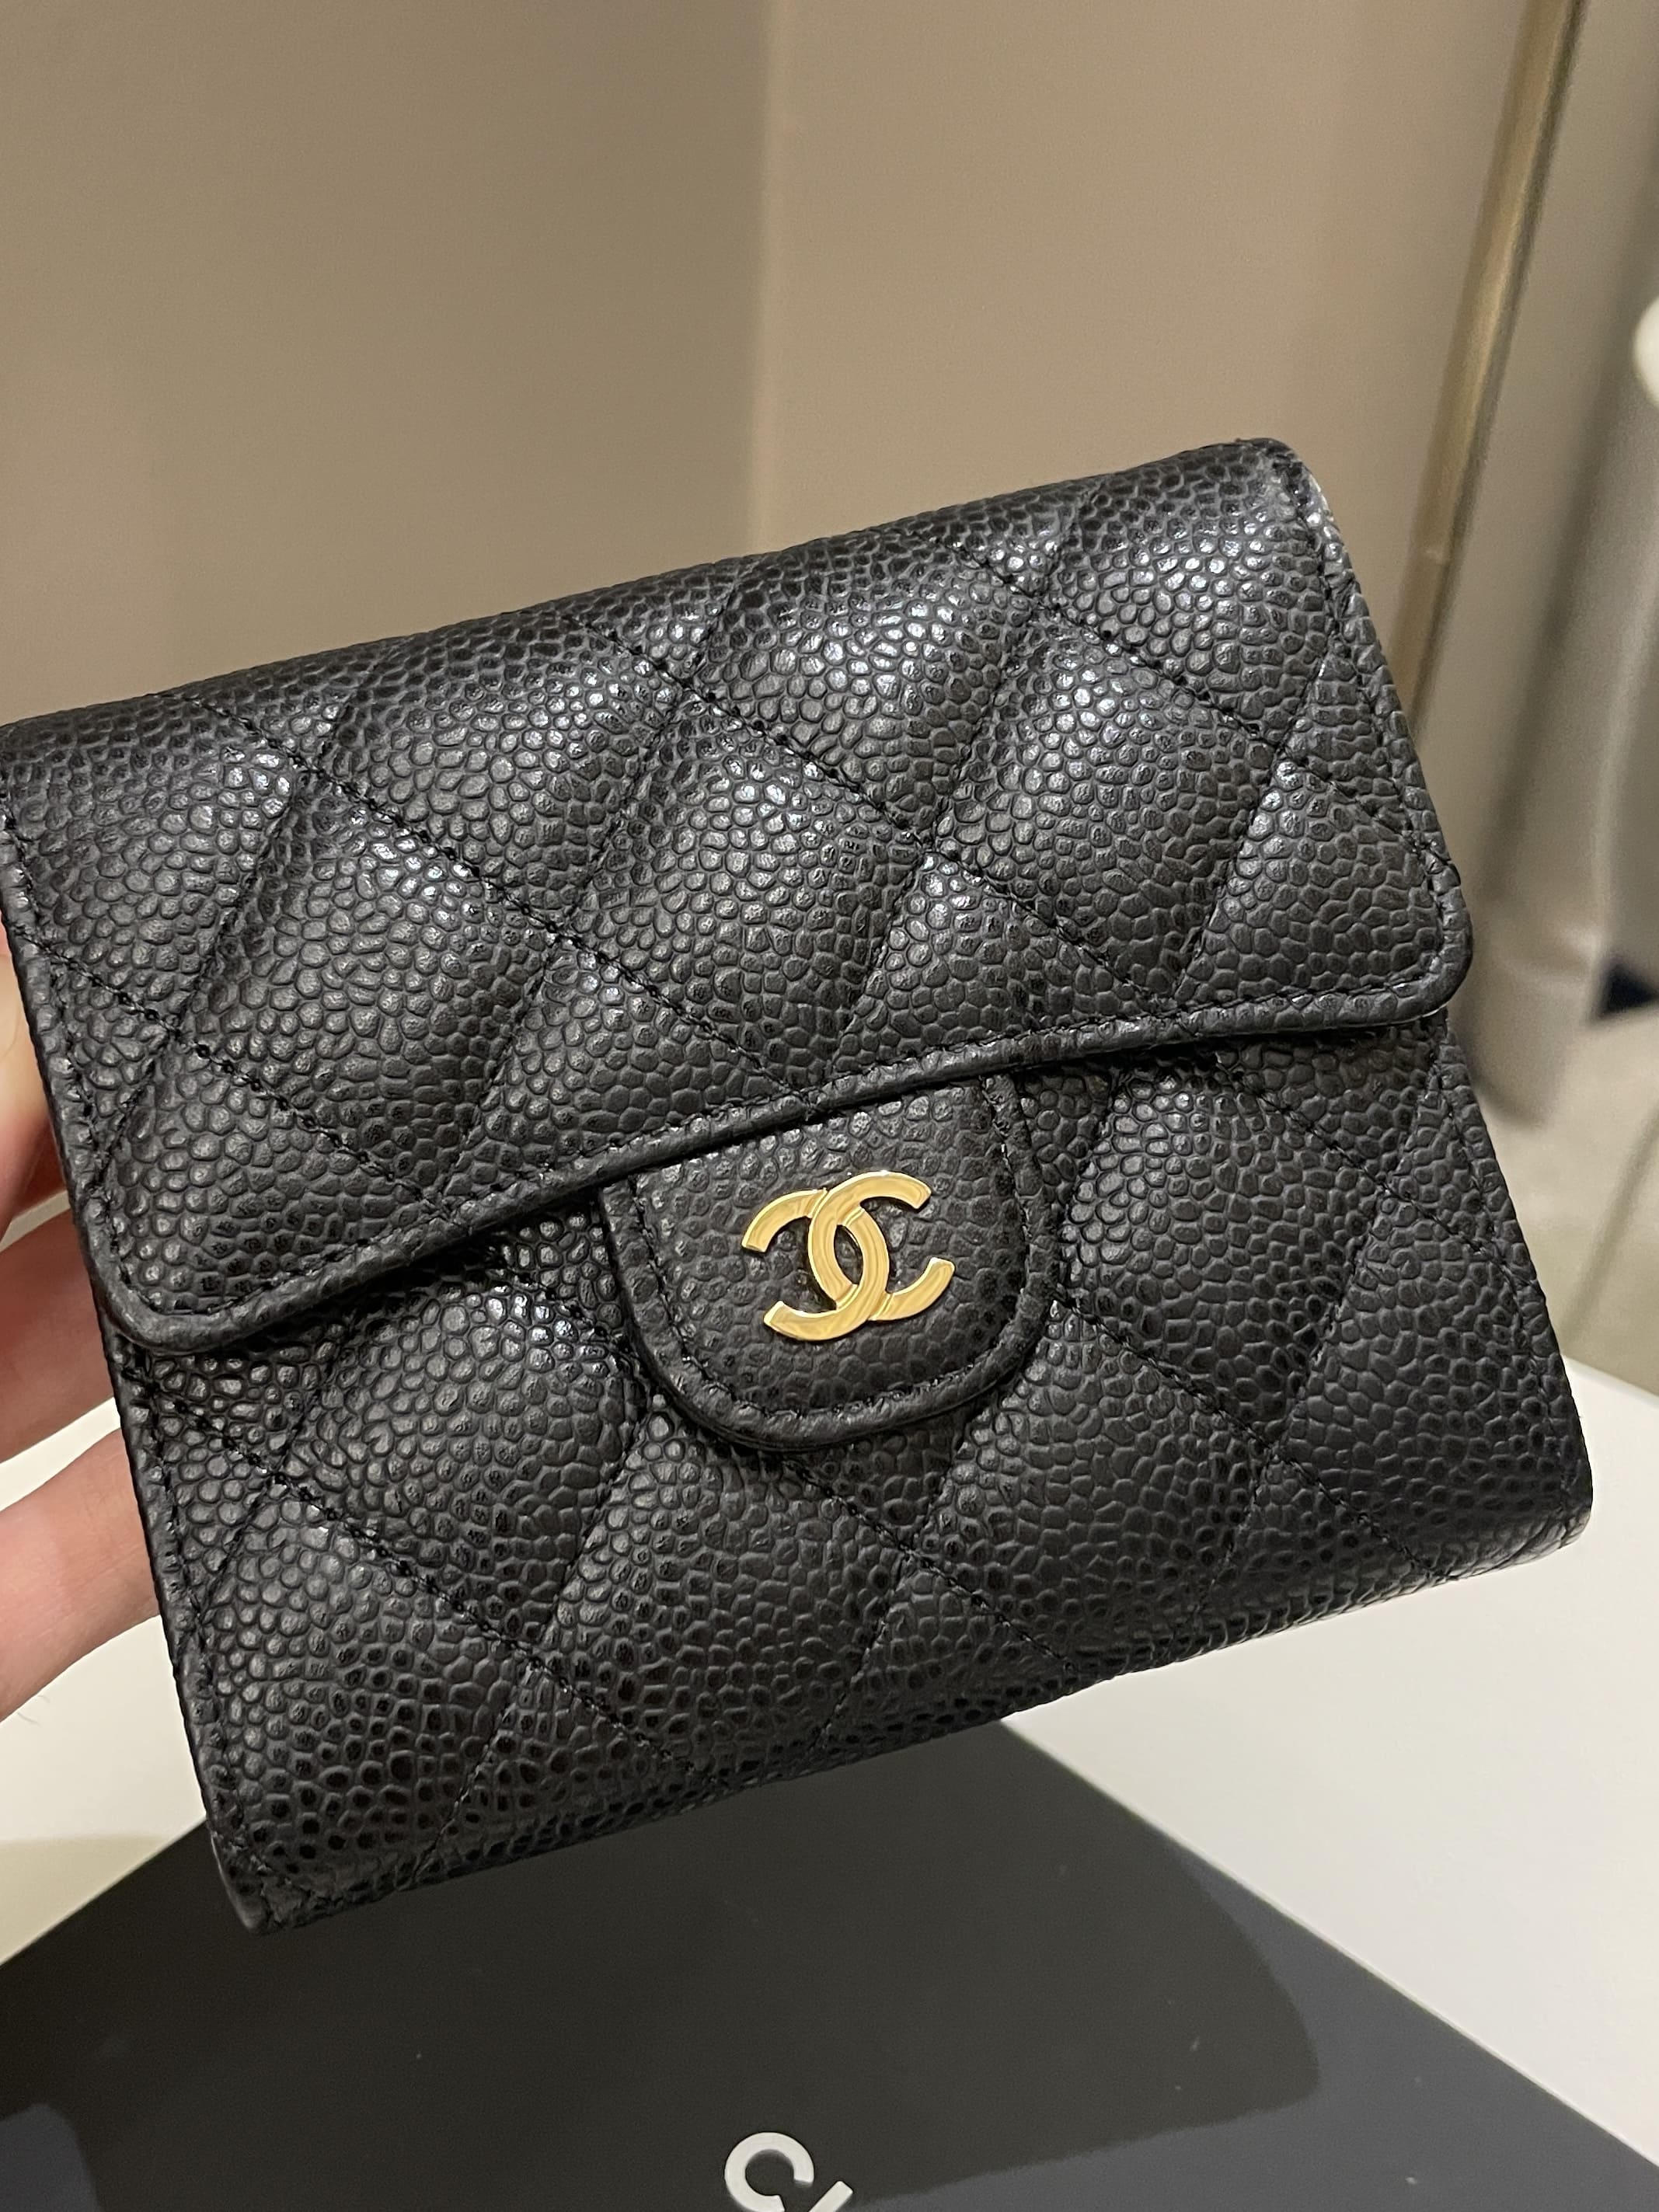 Chanel - Chanel Classic Small Toast Zip Caviar Card Coin Case